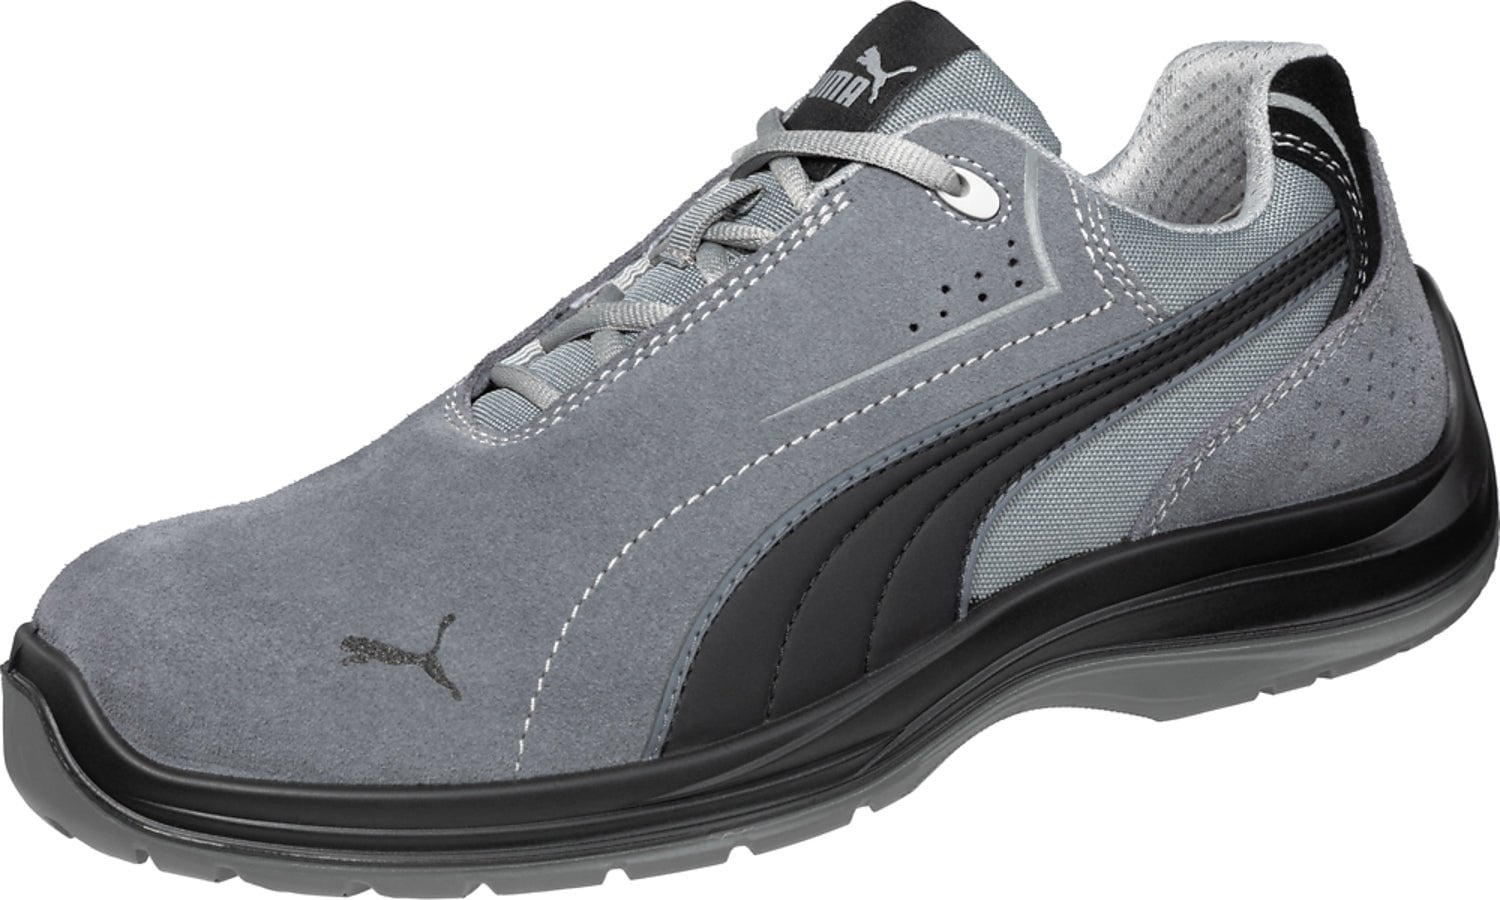 Puma Oxford Company Safety Western Moto Work CT Touring Shoes Mens Low The – Leather Grey